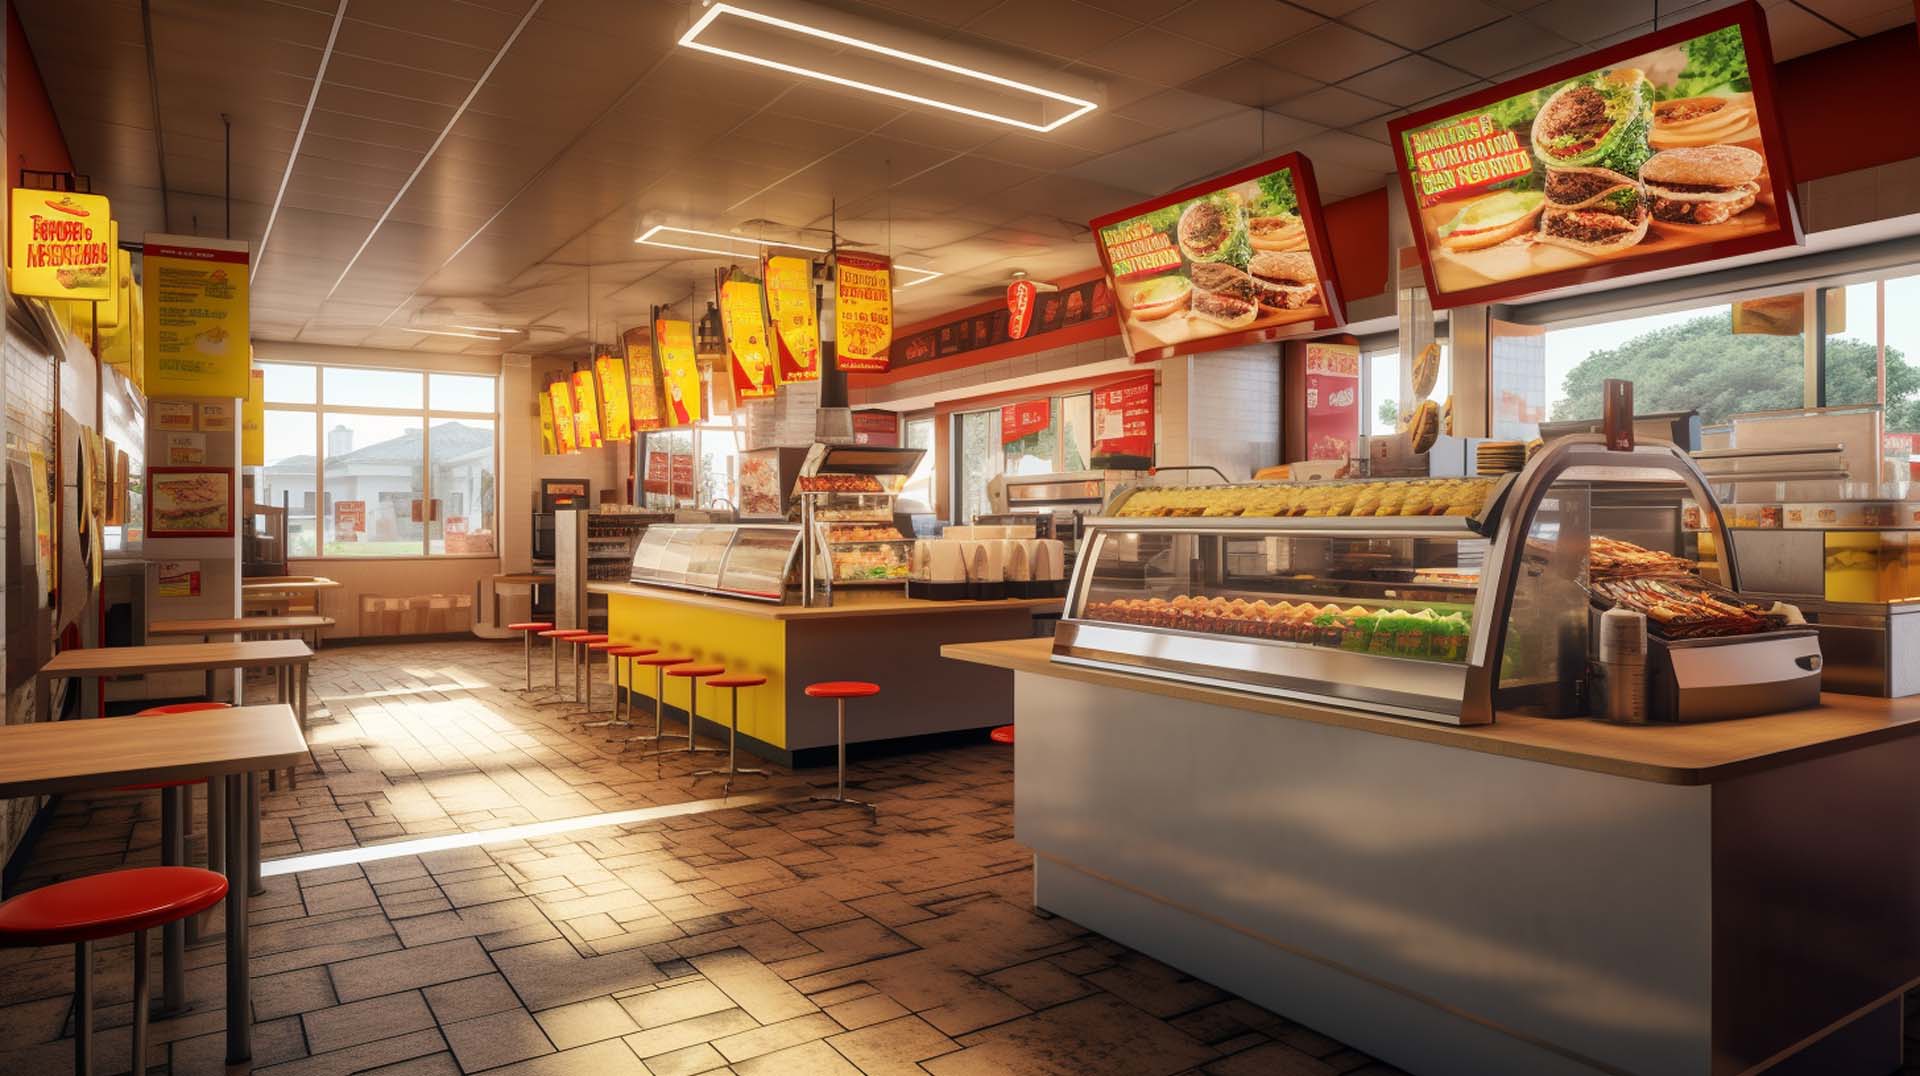 Aurora has a wide variety of delicious fast food options to choose from.